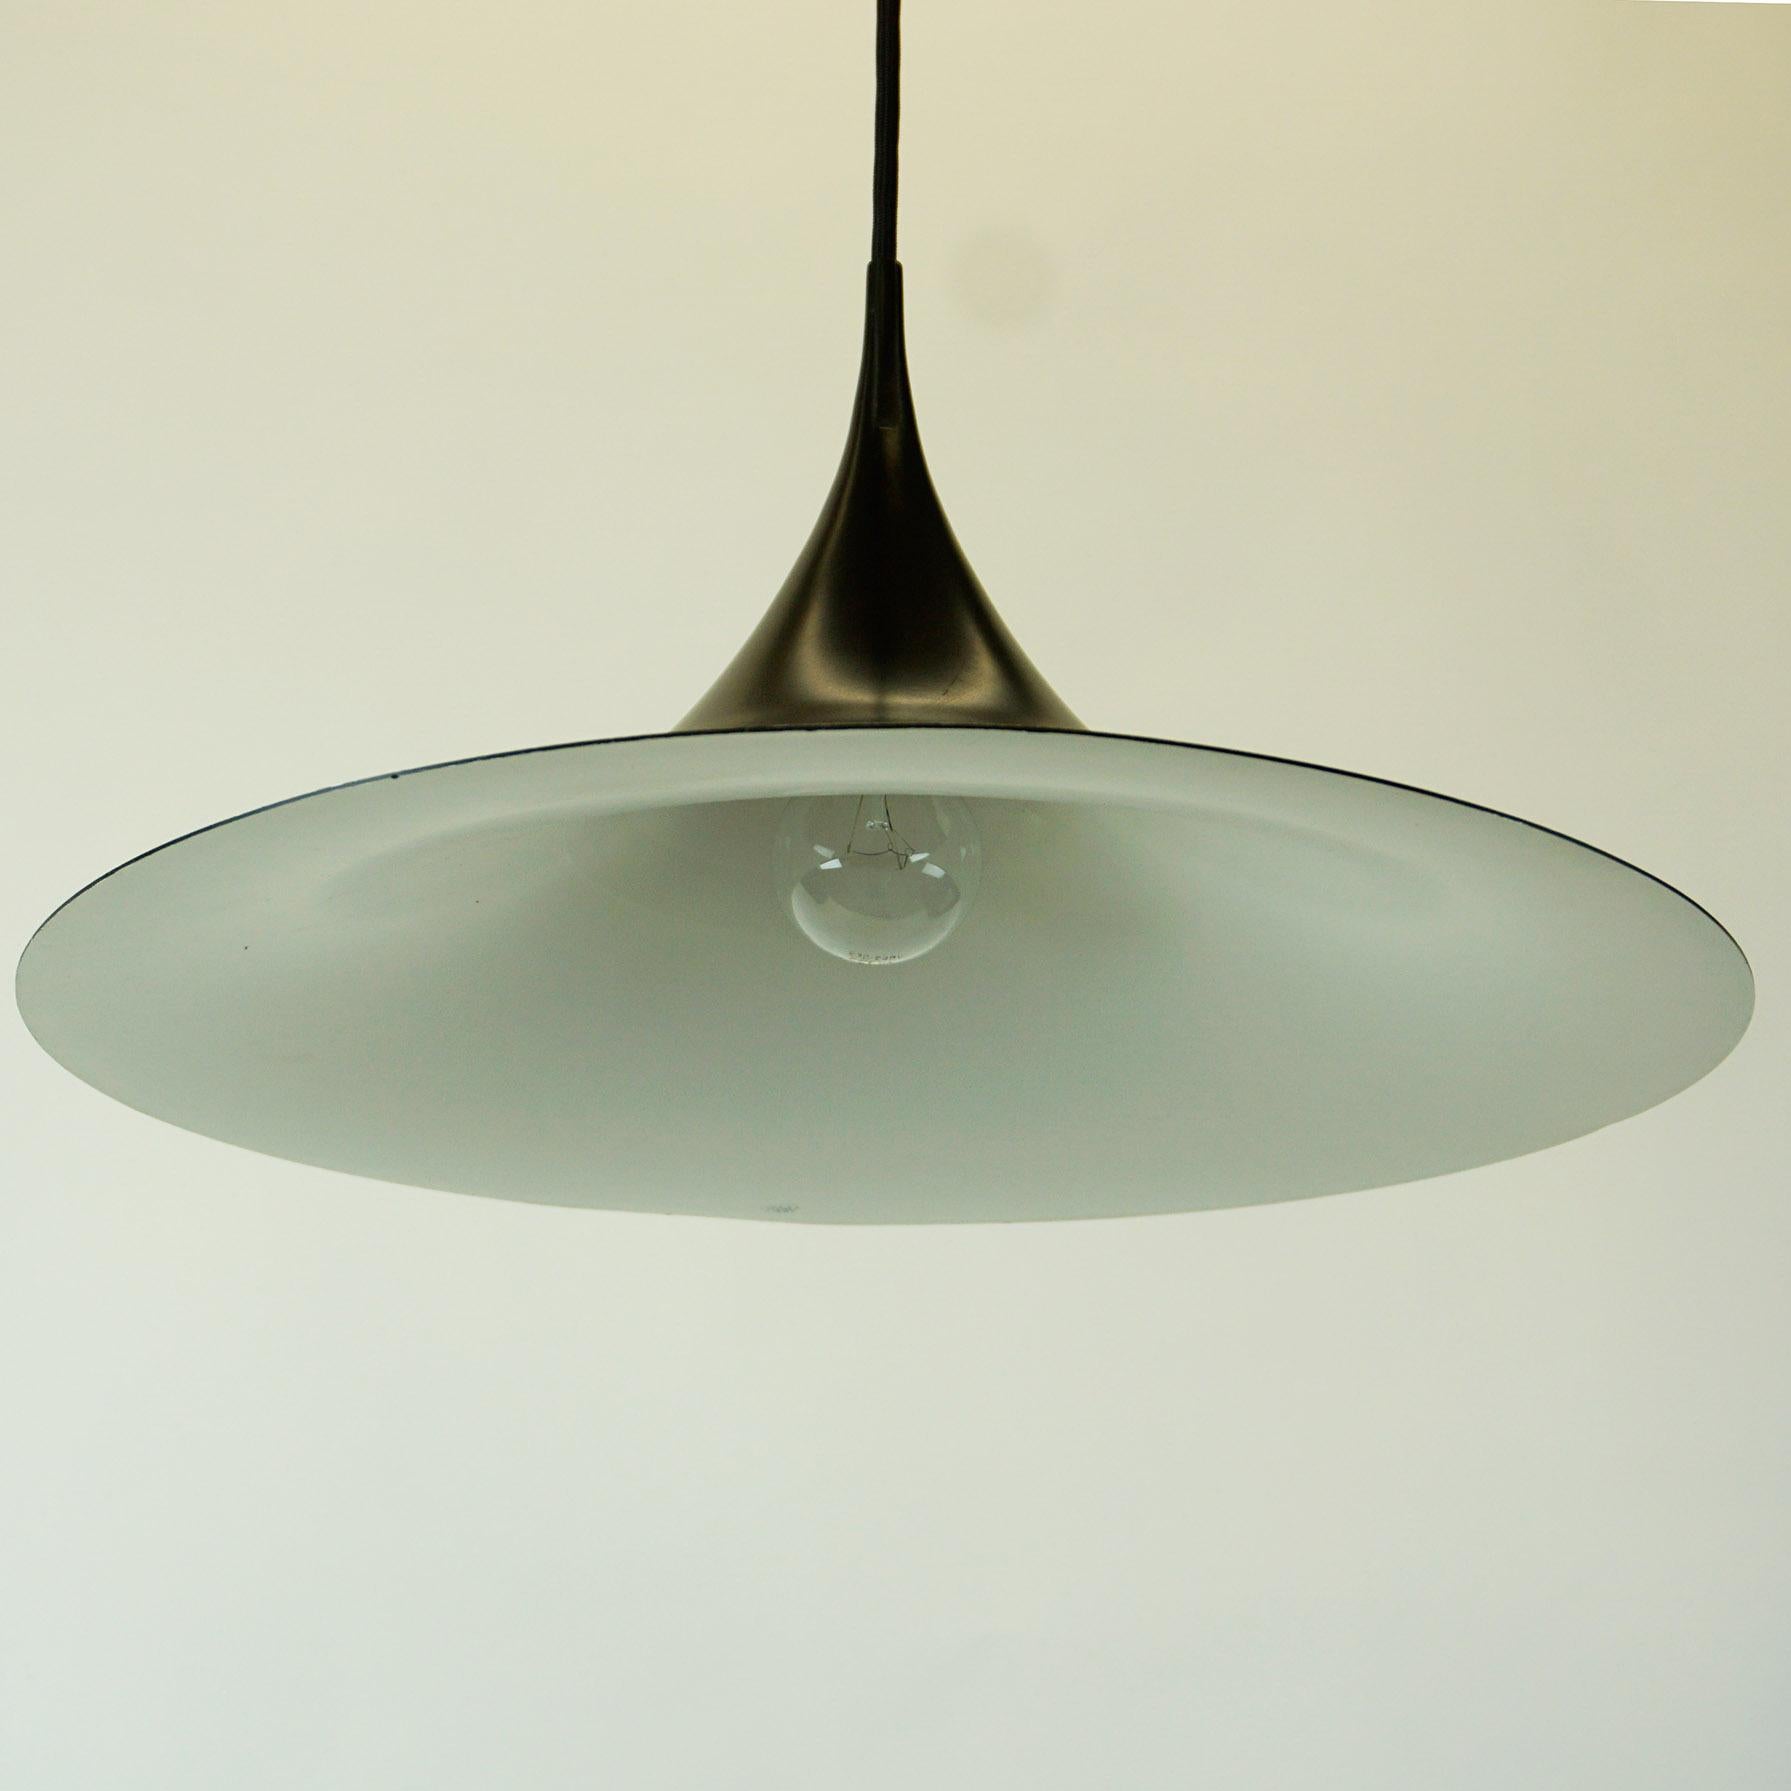 Black lacquered semi pendant lamp with off-white interior. The semi is one of the most iconic designs by Fog & Mørup. It is in very good condition with a few smaller signs of wear and has a 48 cm diameter, making it perfect over a dining or kitchen